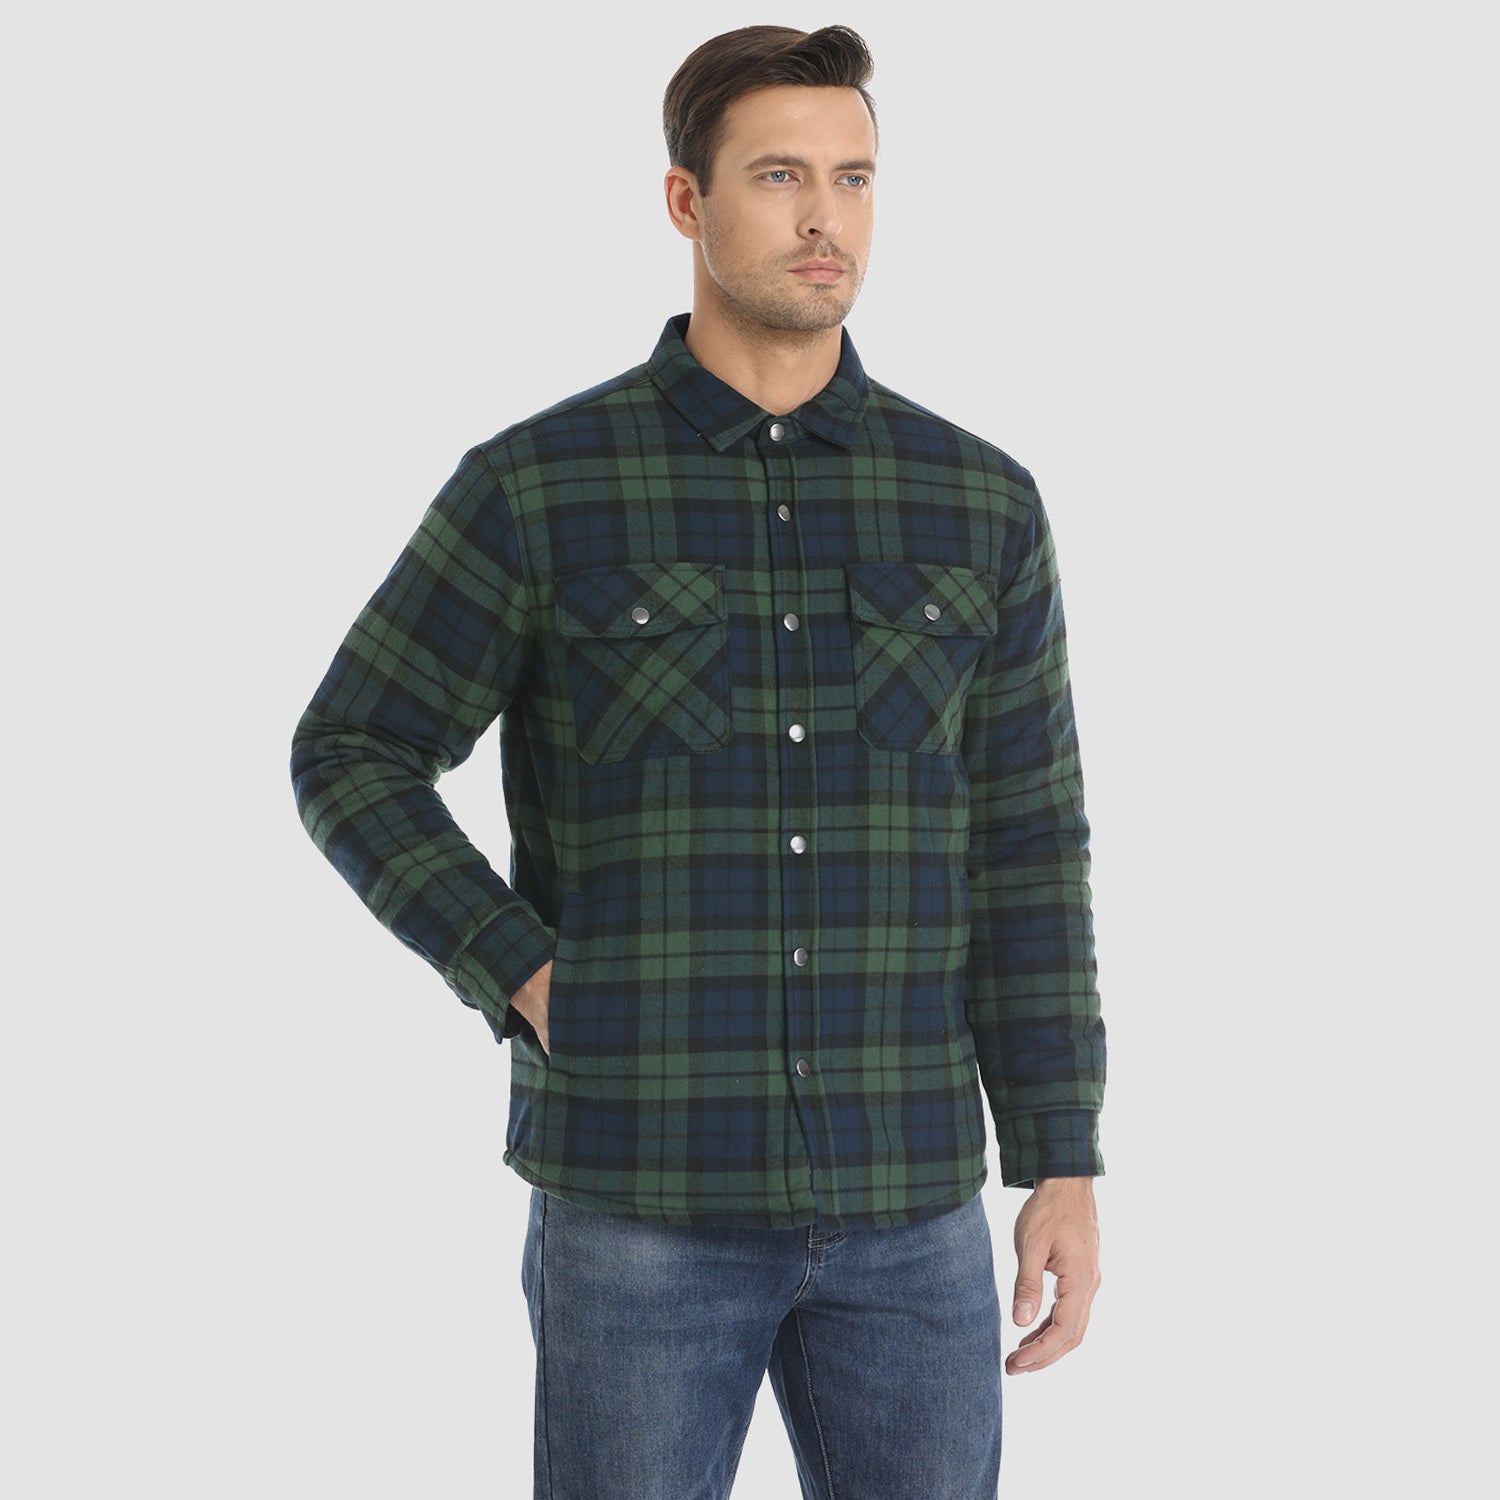 YYDGH Men's Flannel Plaid Shirt Jacket Winter Warm Long Sleeve Quilted  Lined Plaid Drawstring Coats Soft Button Down Thick Shirts with Hood Army  Green S 